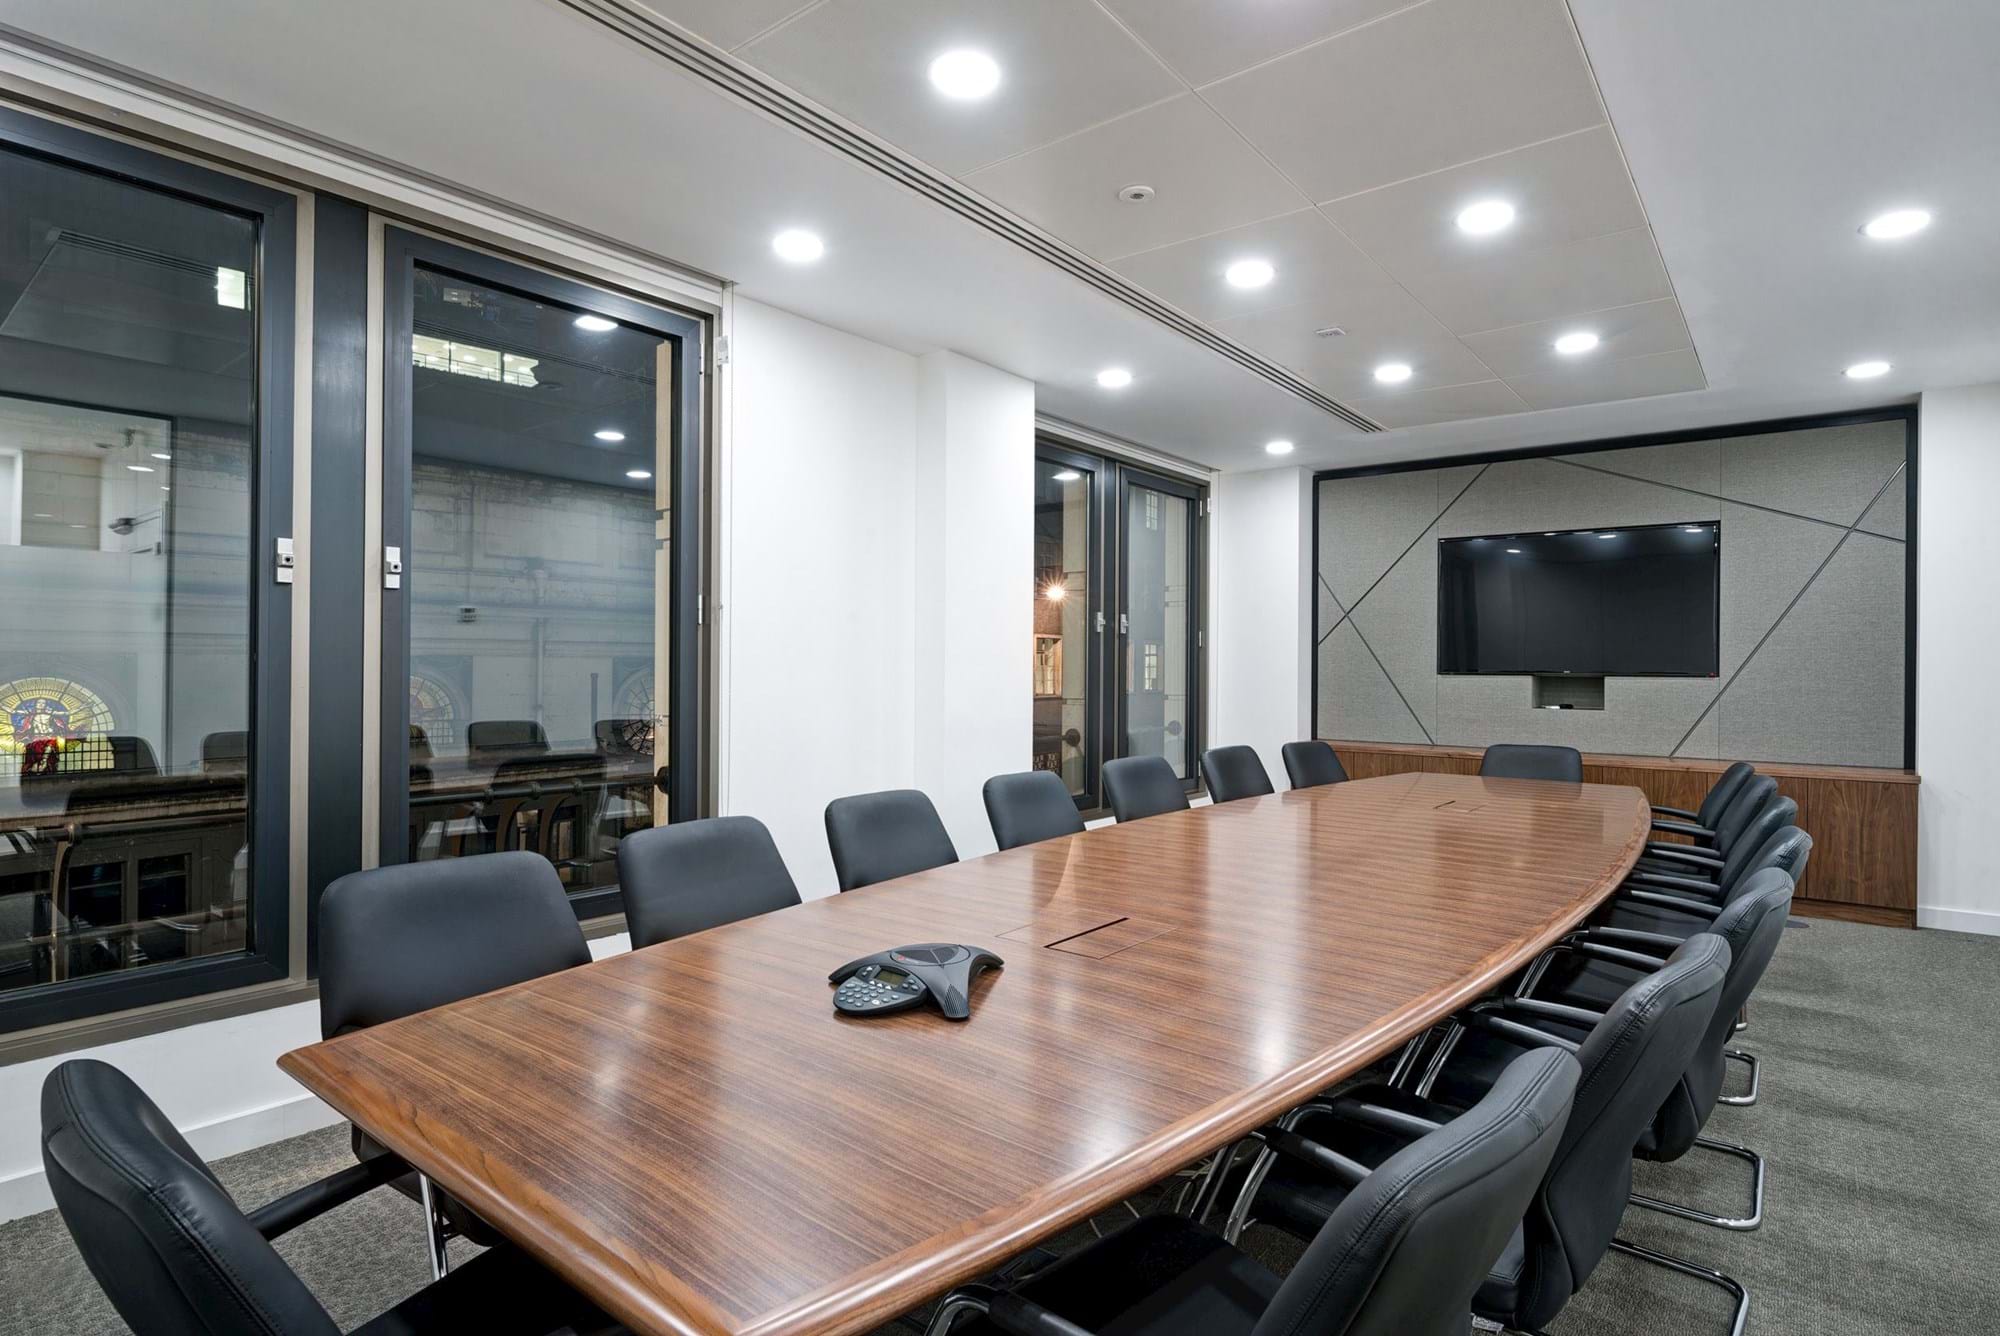 Modus Workspace office design, fit out and refurbishment - DPDHL - Meeting Room - DHL 05 highres sRGB.jpg